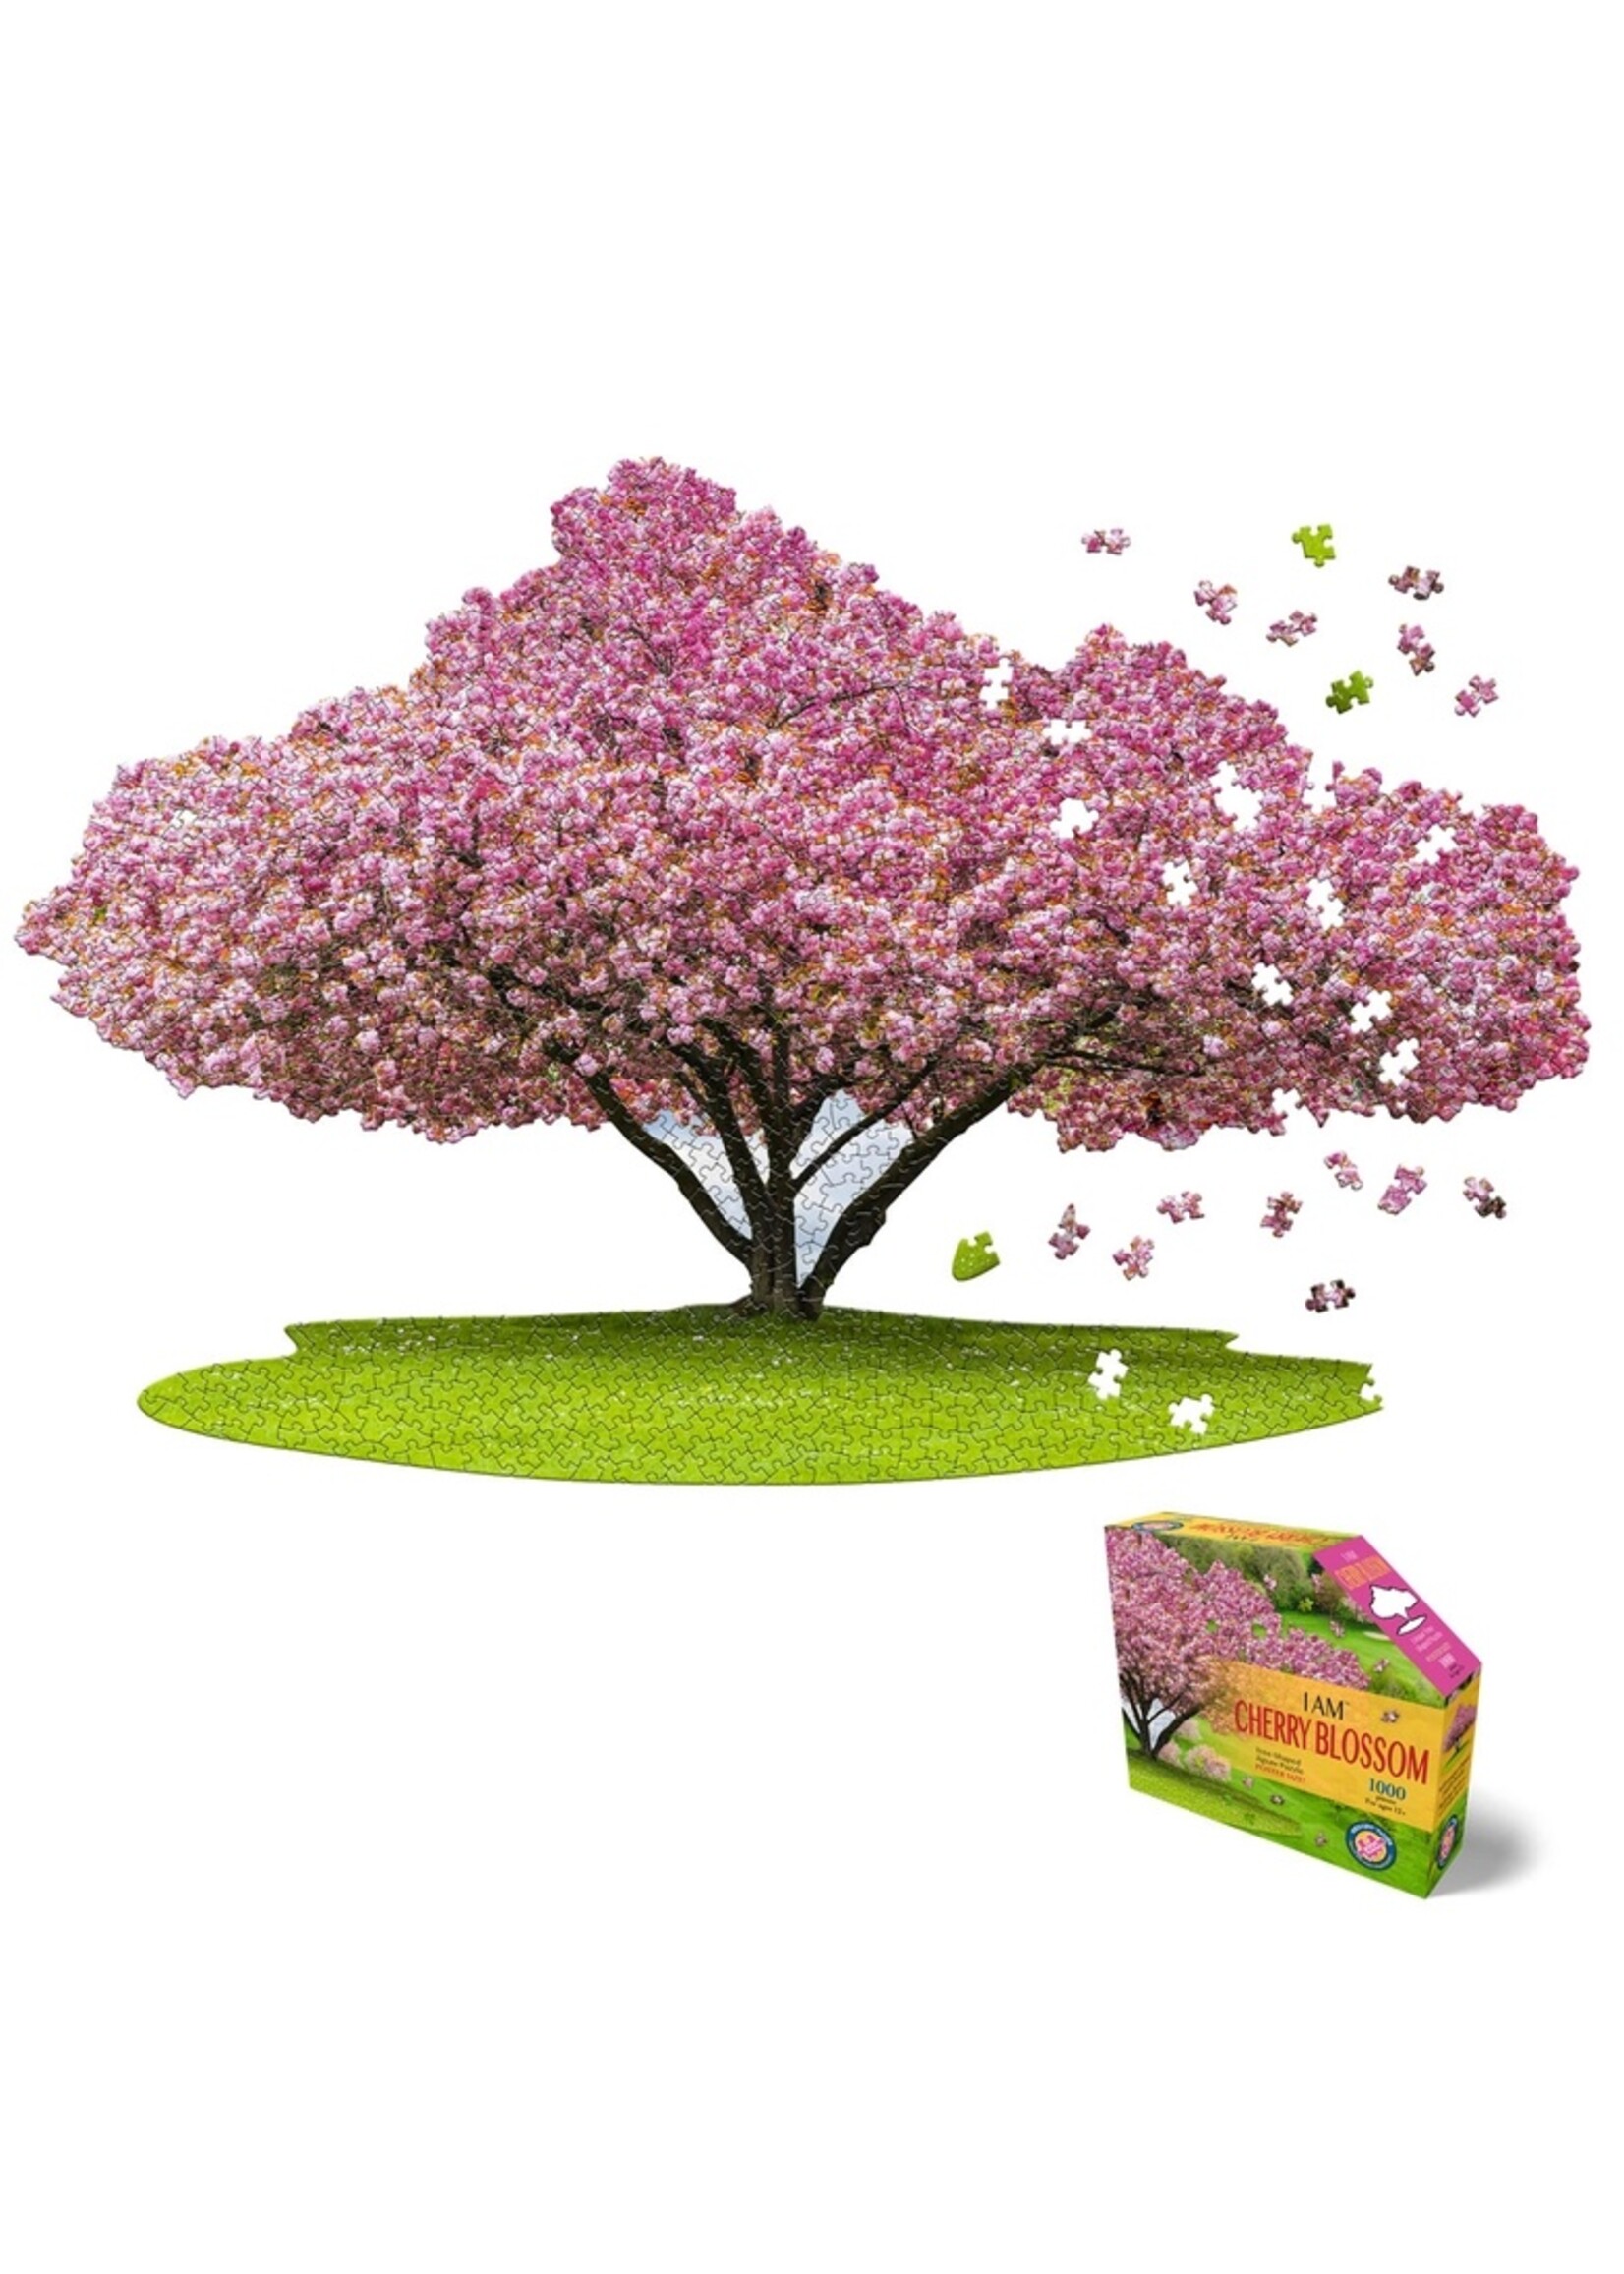 Madd Capp Games & Puzzles PUZZLE - I AM CHERRY BLOSSOM 1000 pieces